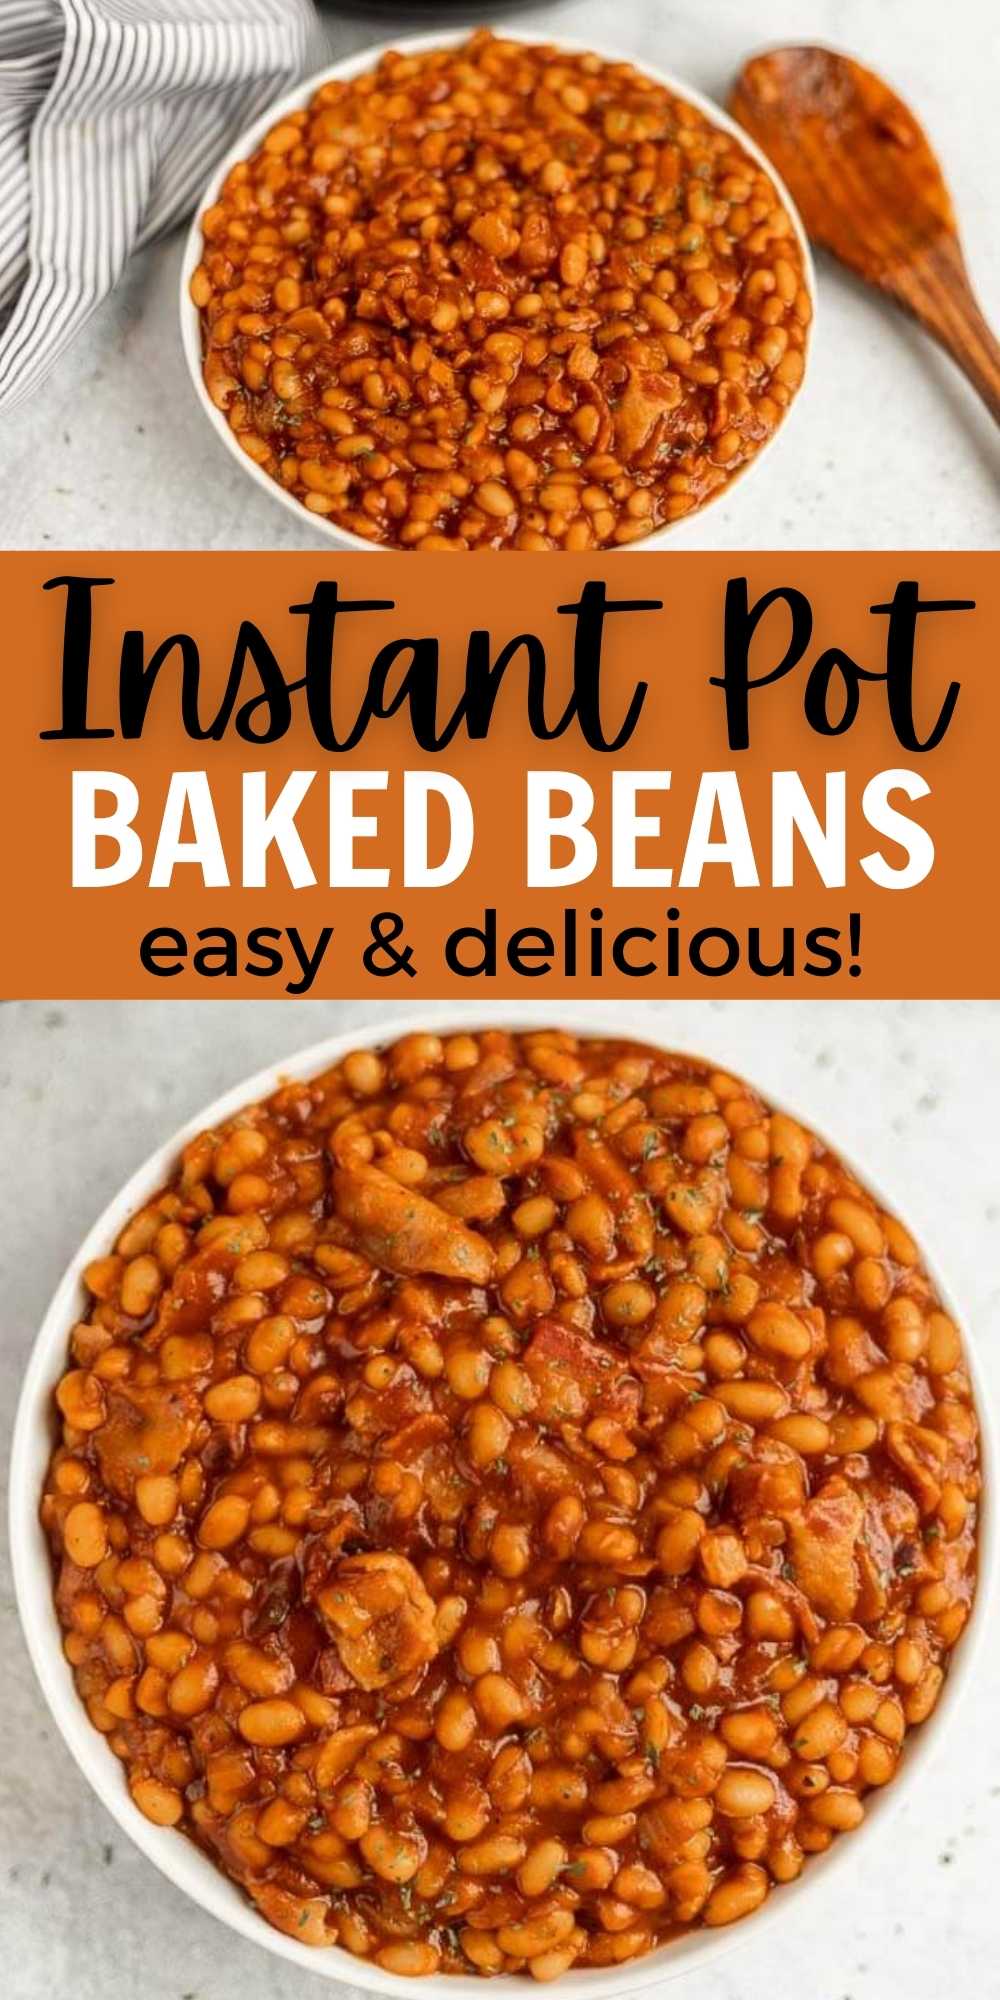 No soak Instant Pot baked beans are super easy to make in an electric pressure cooker.  Perfectly cooked in your pressure cooker every single time. Learn how to make these instant pot baked beans from scratch. #eatingonadime #instantpotrecipes #bakedbeans #beanrecipes #sidedishes #sidedishrecipes 
